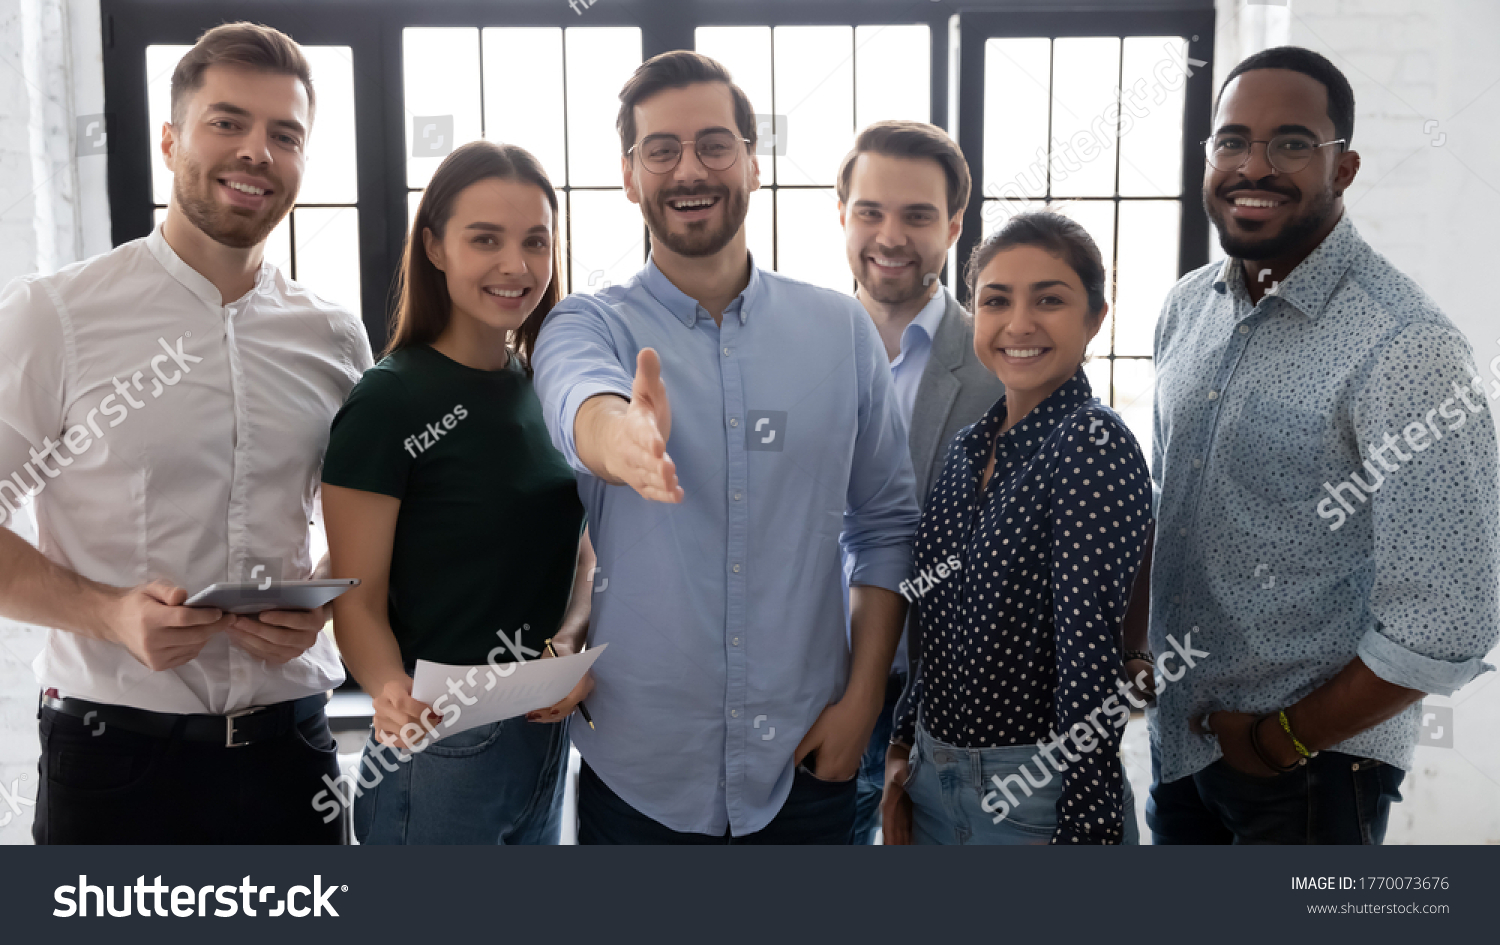 Millennial male leader stretch out his hand for handshake welcoming new employee invites newcomer to corporate team, group showing amity, human resources, boss greets clients express respect concept #1770073676